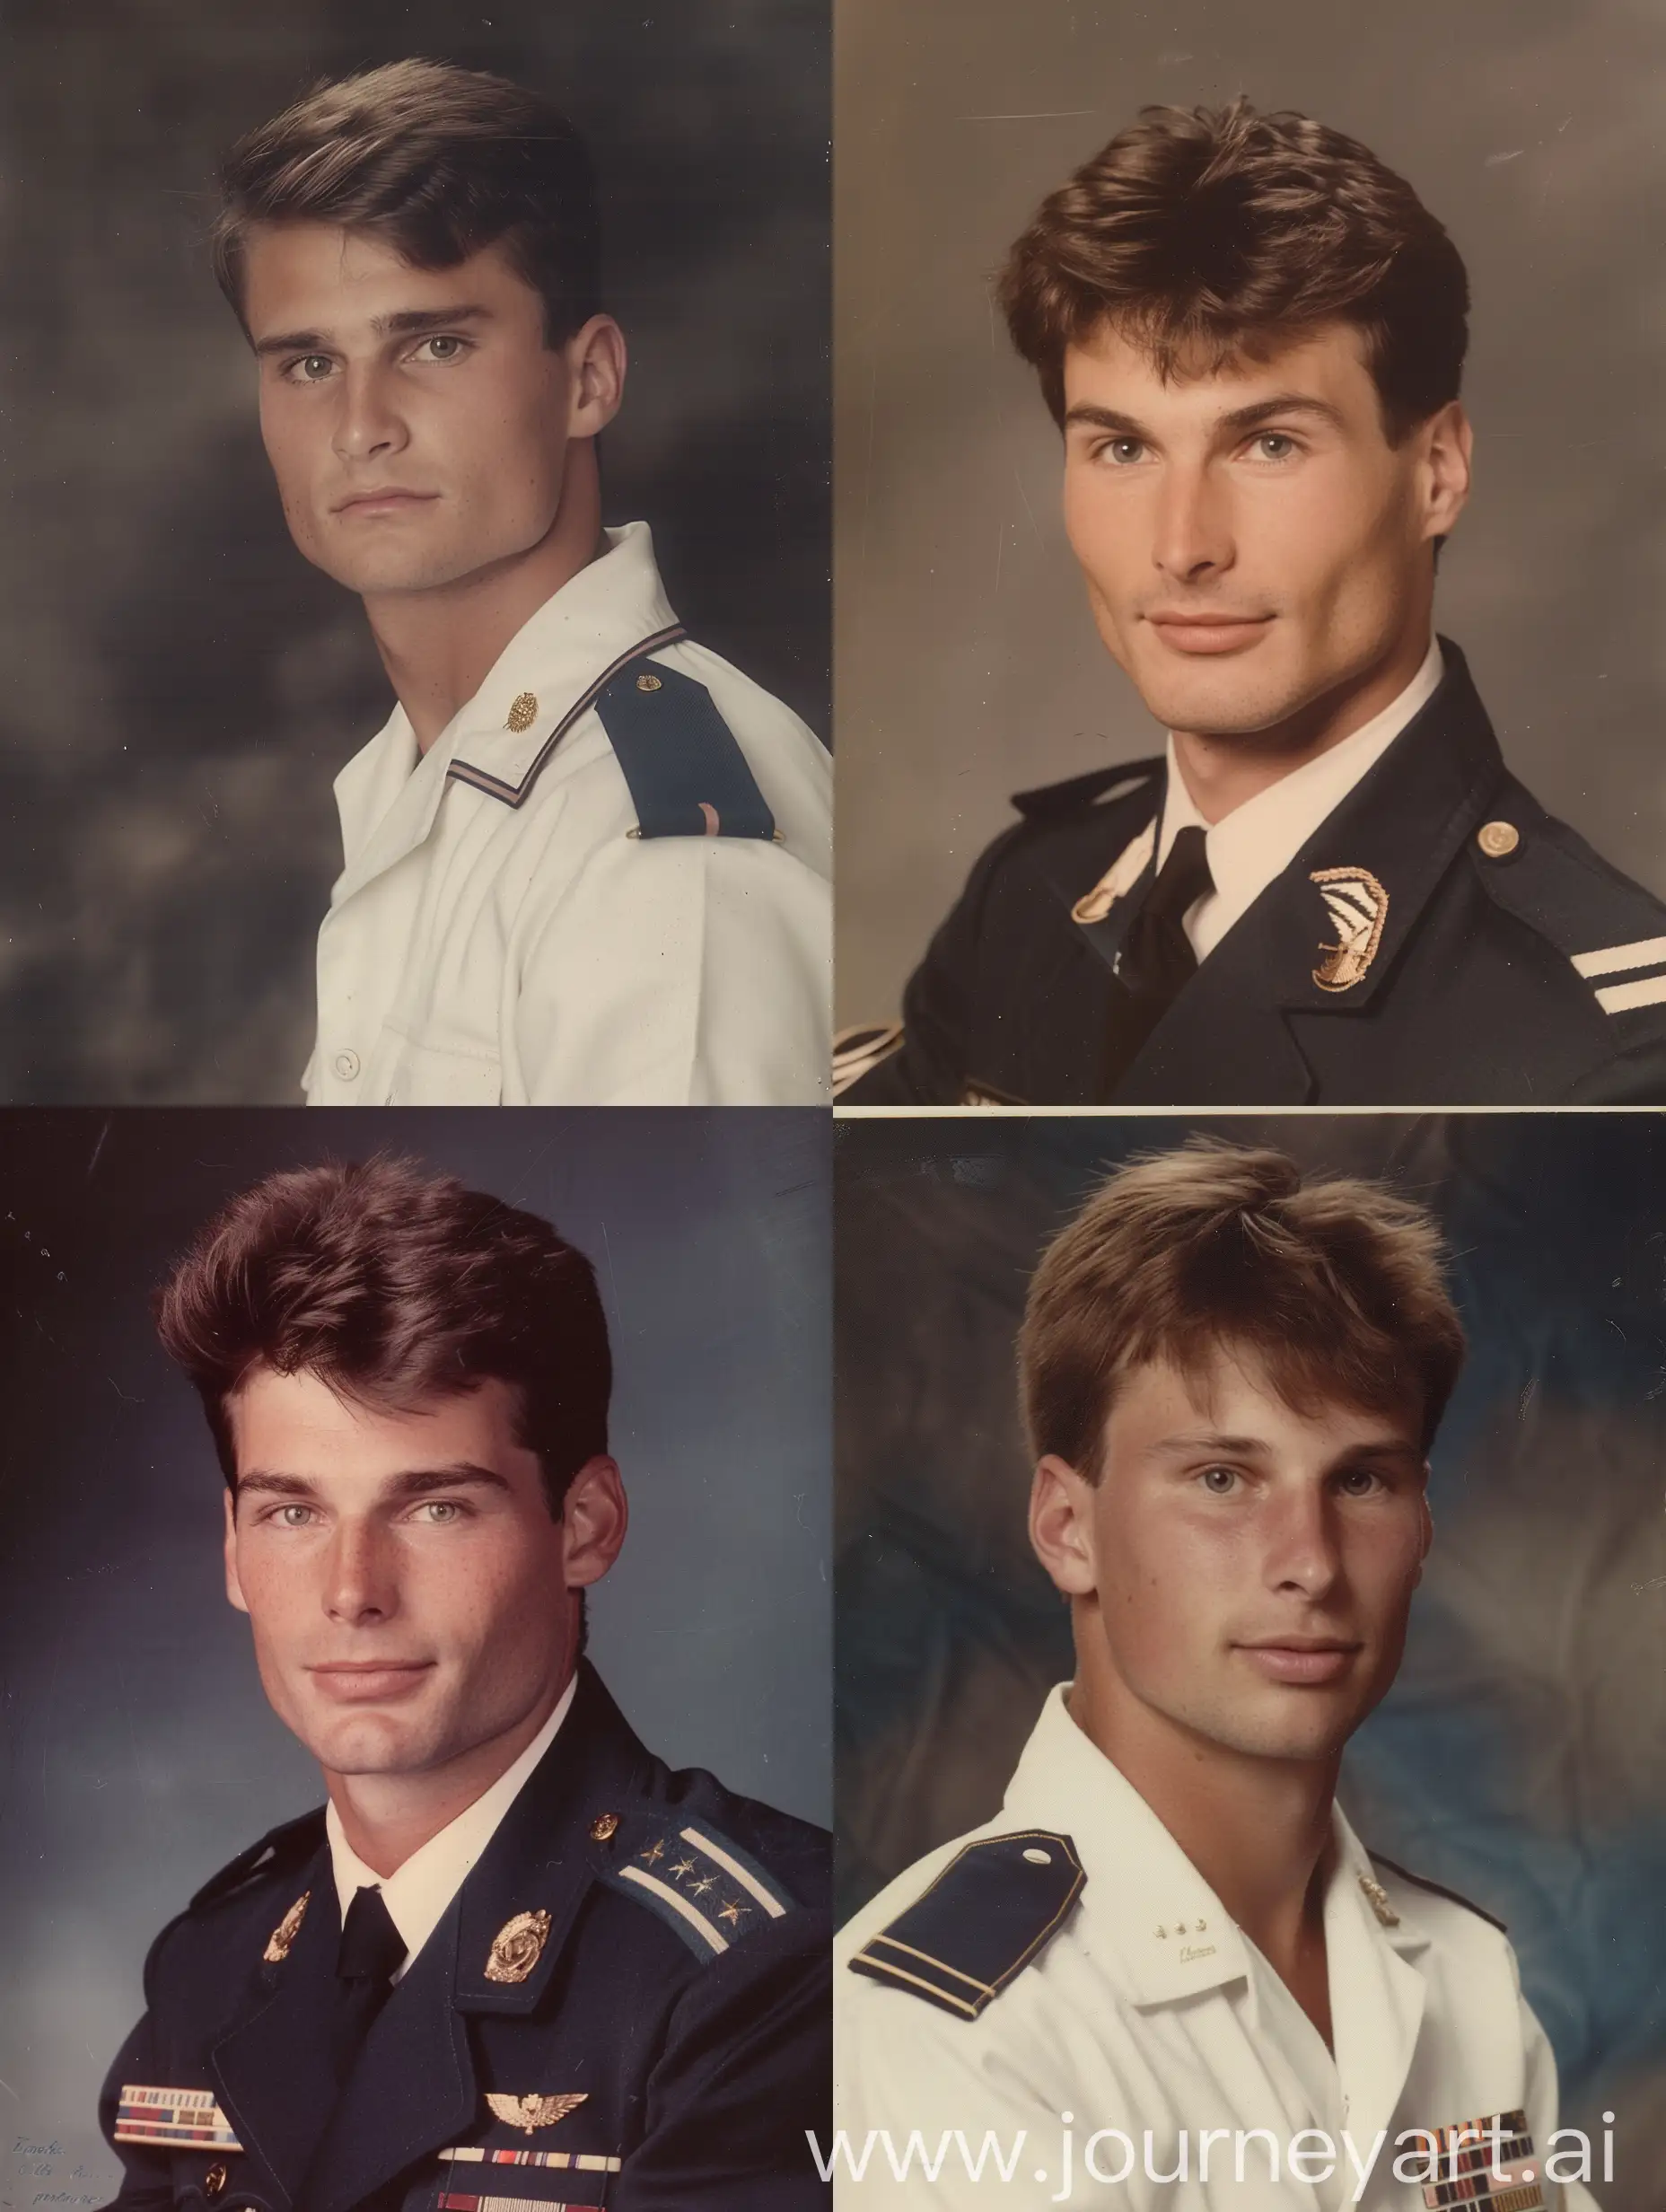 Vintage-90s-Yearbook-Portrait-of-a-Male-Cadet